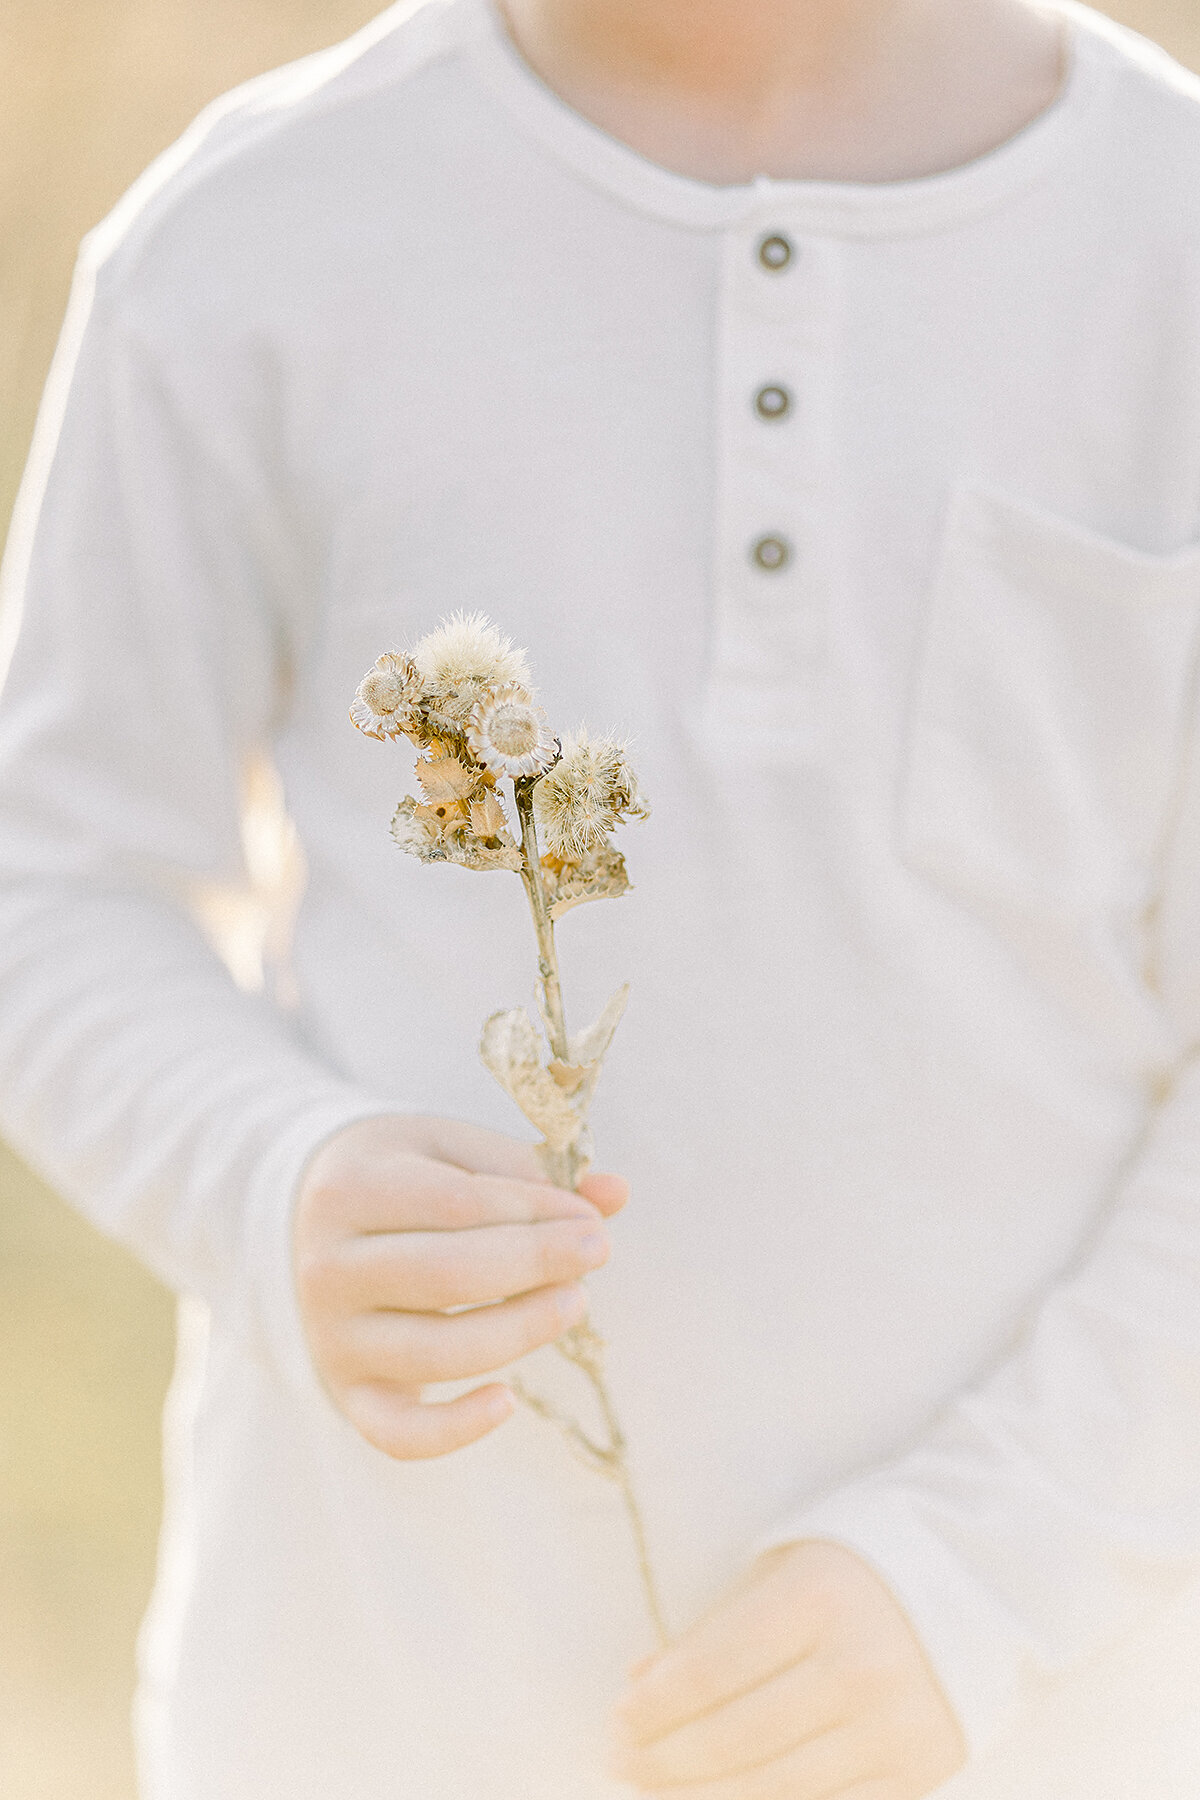 Close up photo of a boy holding a blooming flower.